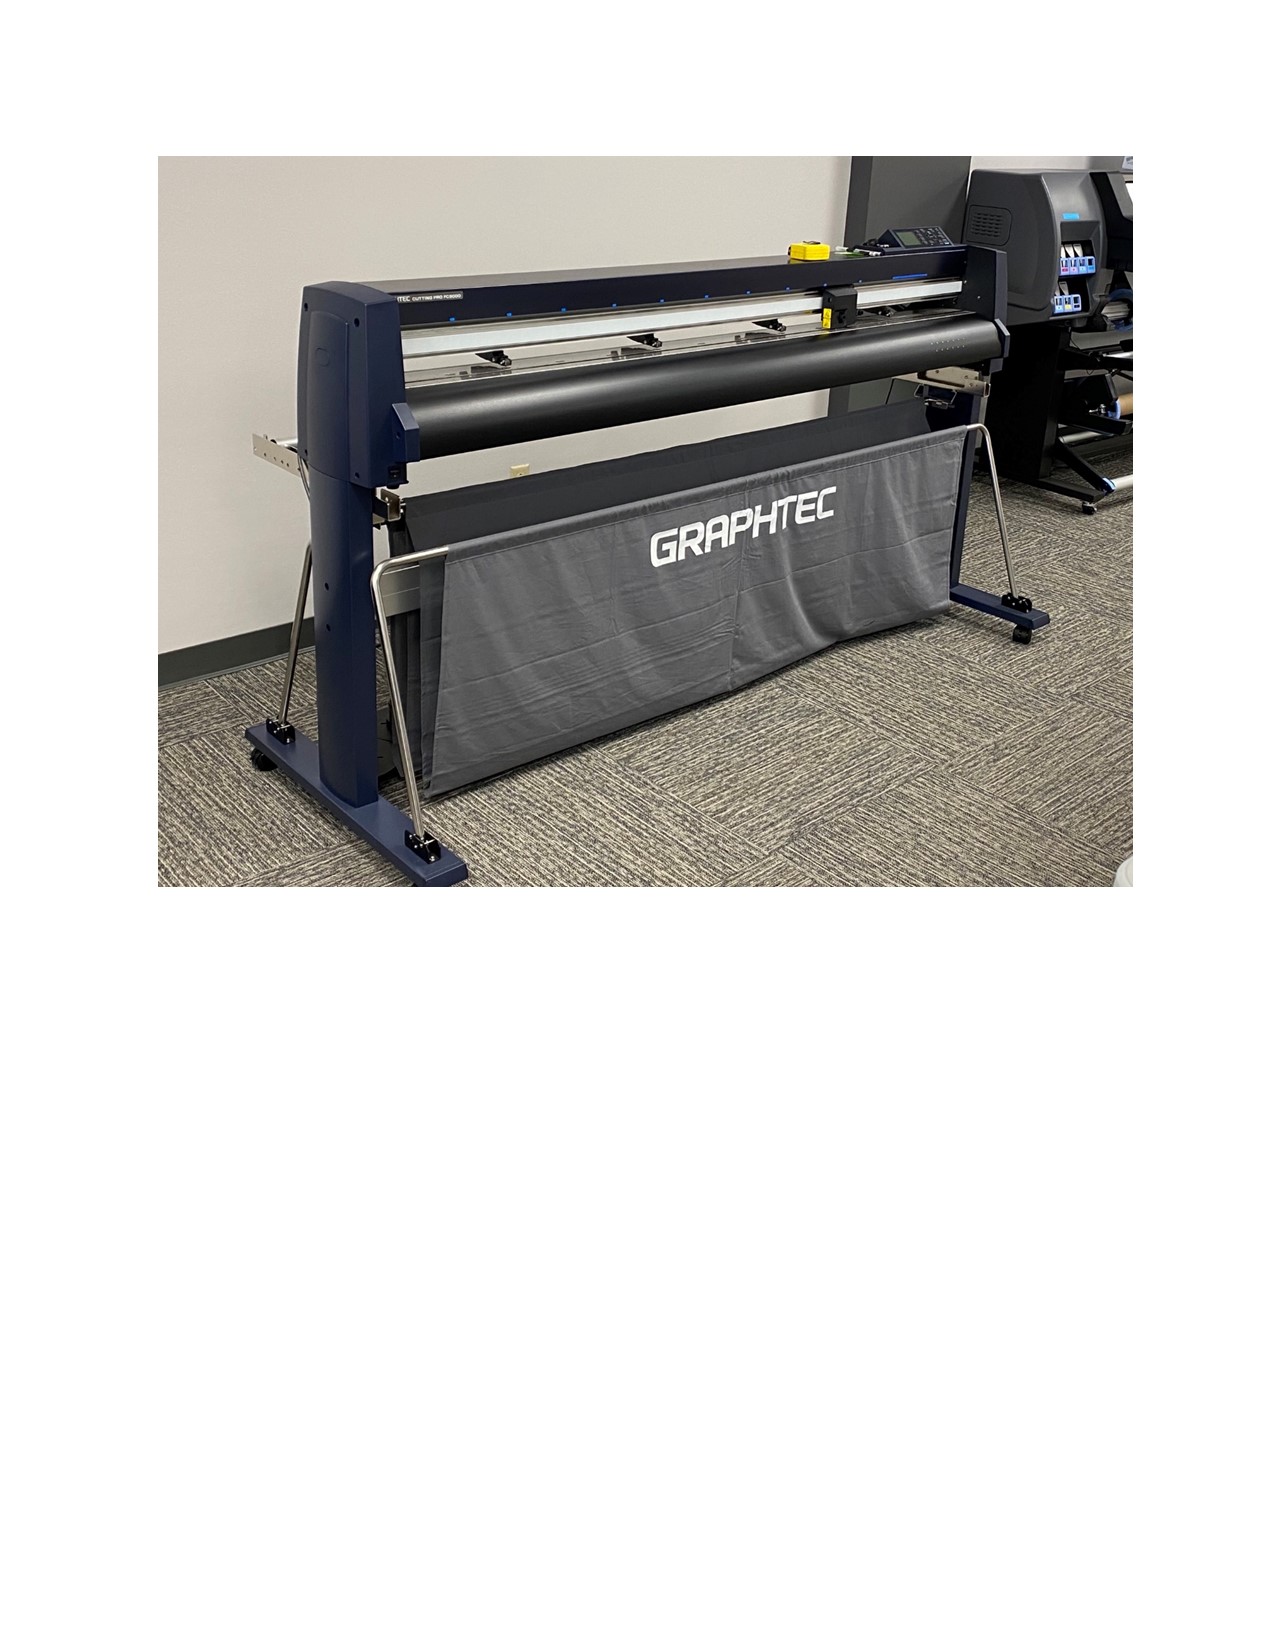 GRAFTEC FC9000 CUTTING PLOTTER FOR SALE.jpg